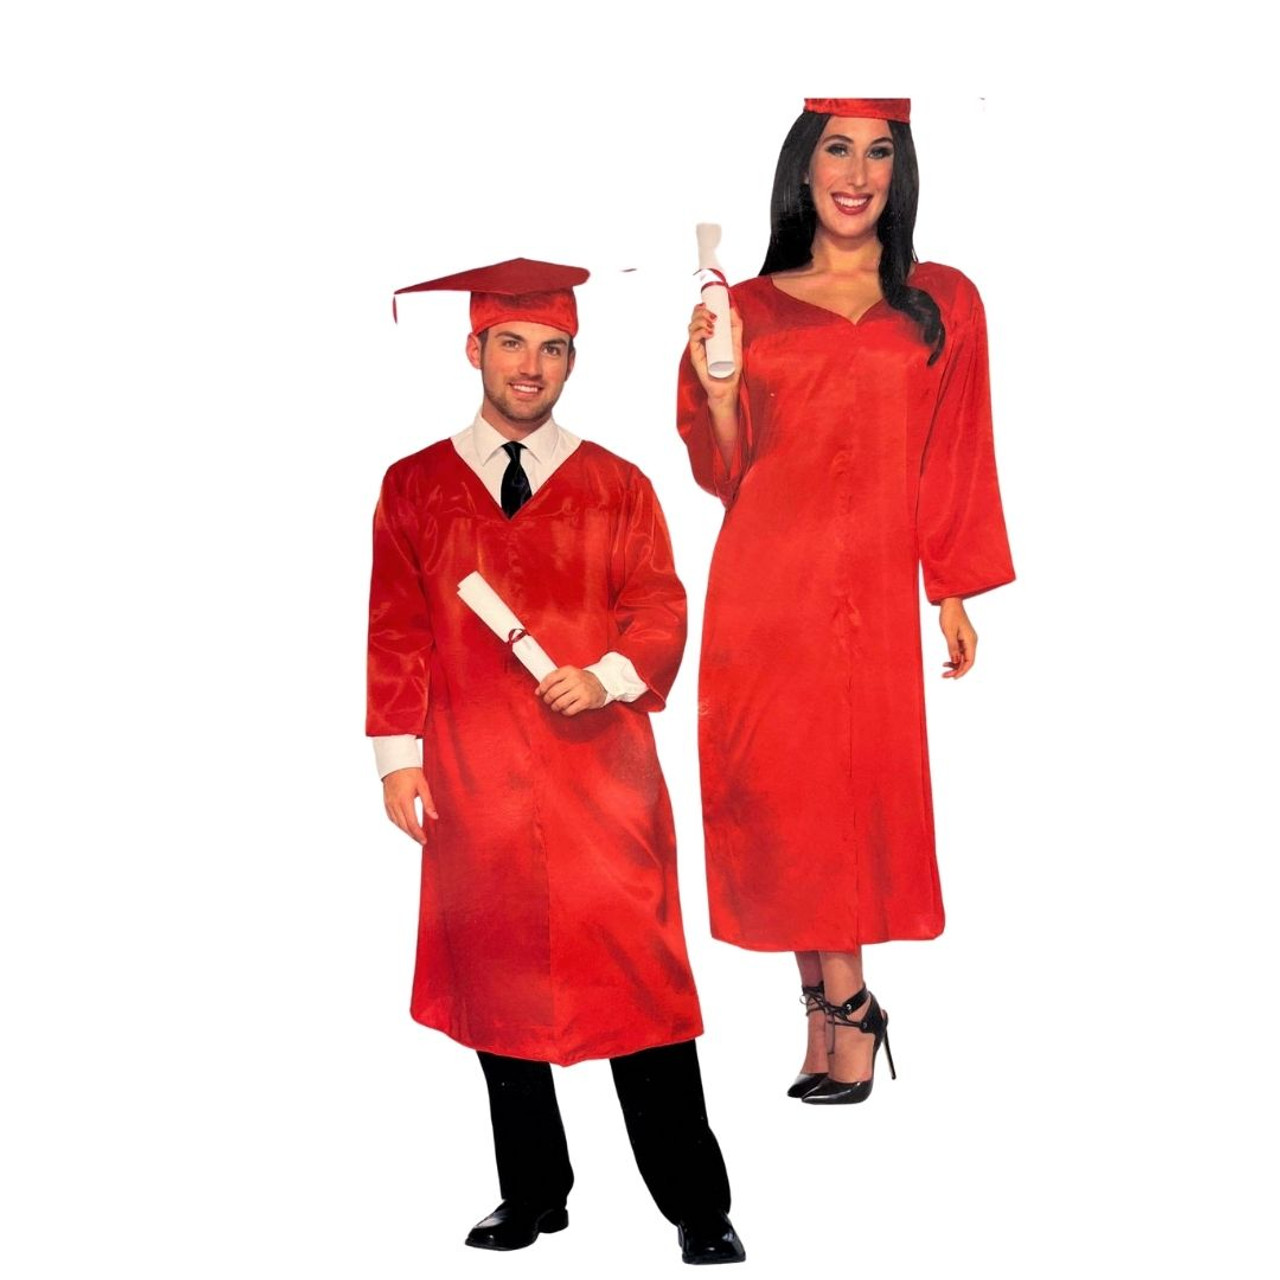 Costume Adults graduation gowns/robes All Age (34, OLIVE GREEN) :  Amazon.in: Toys & Games